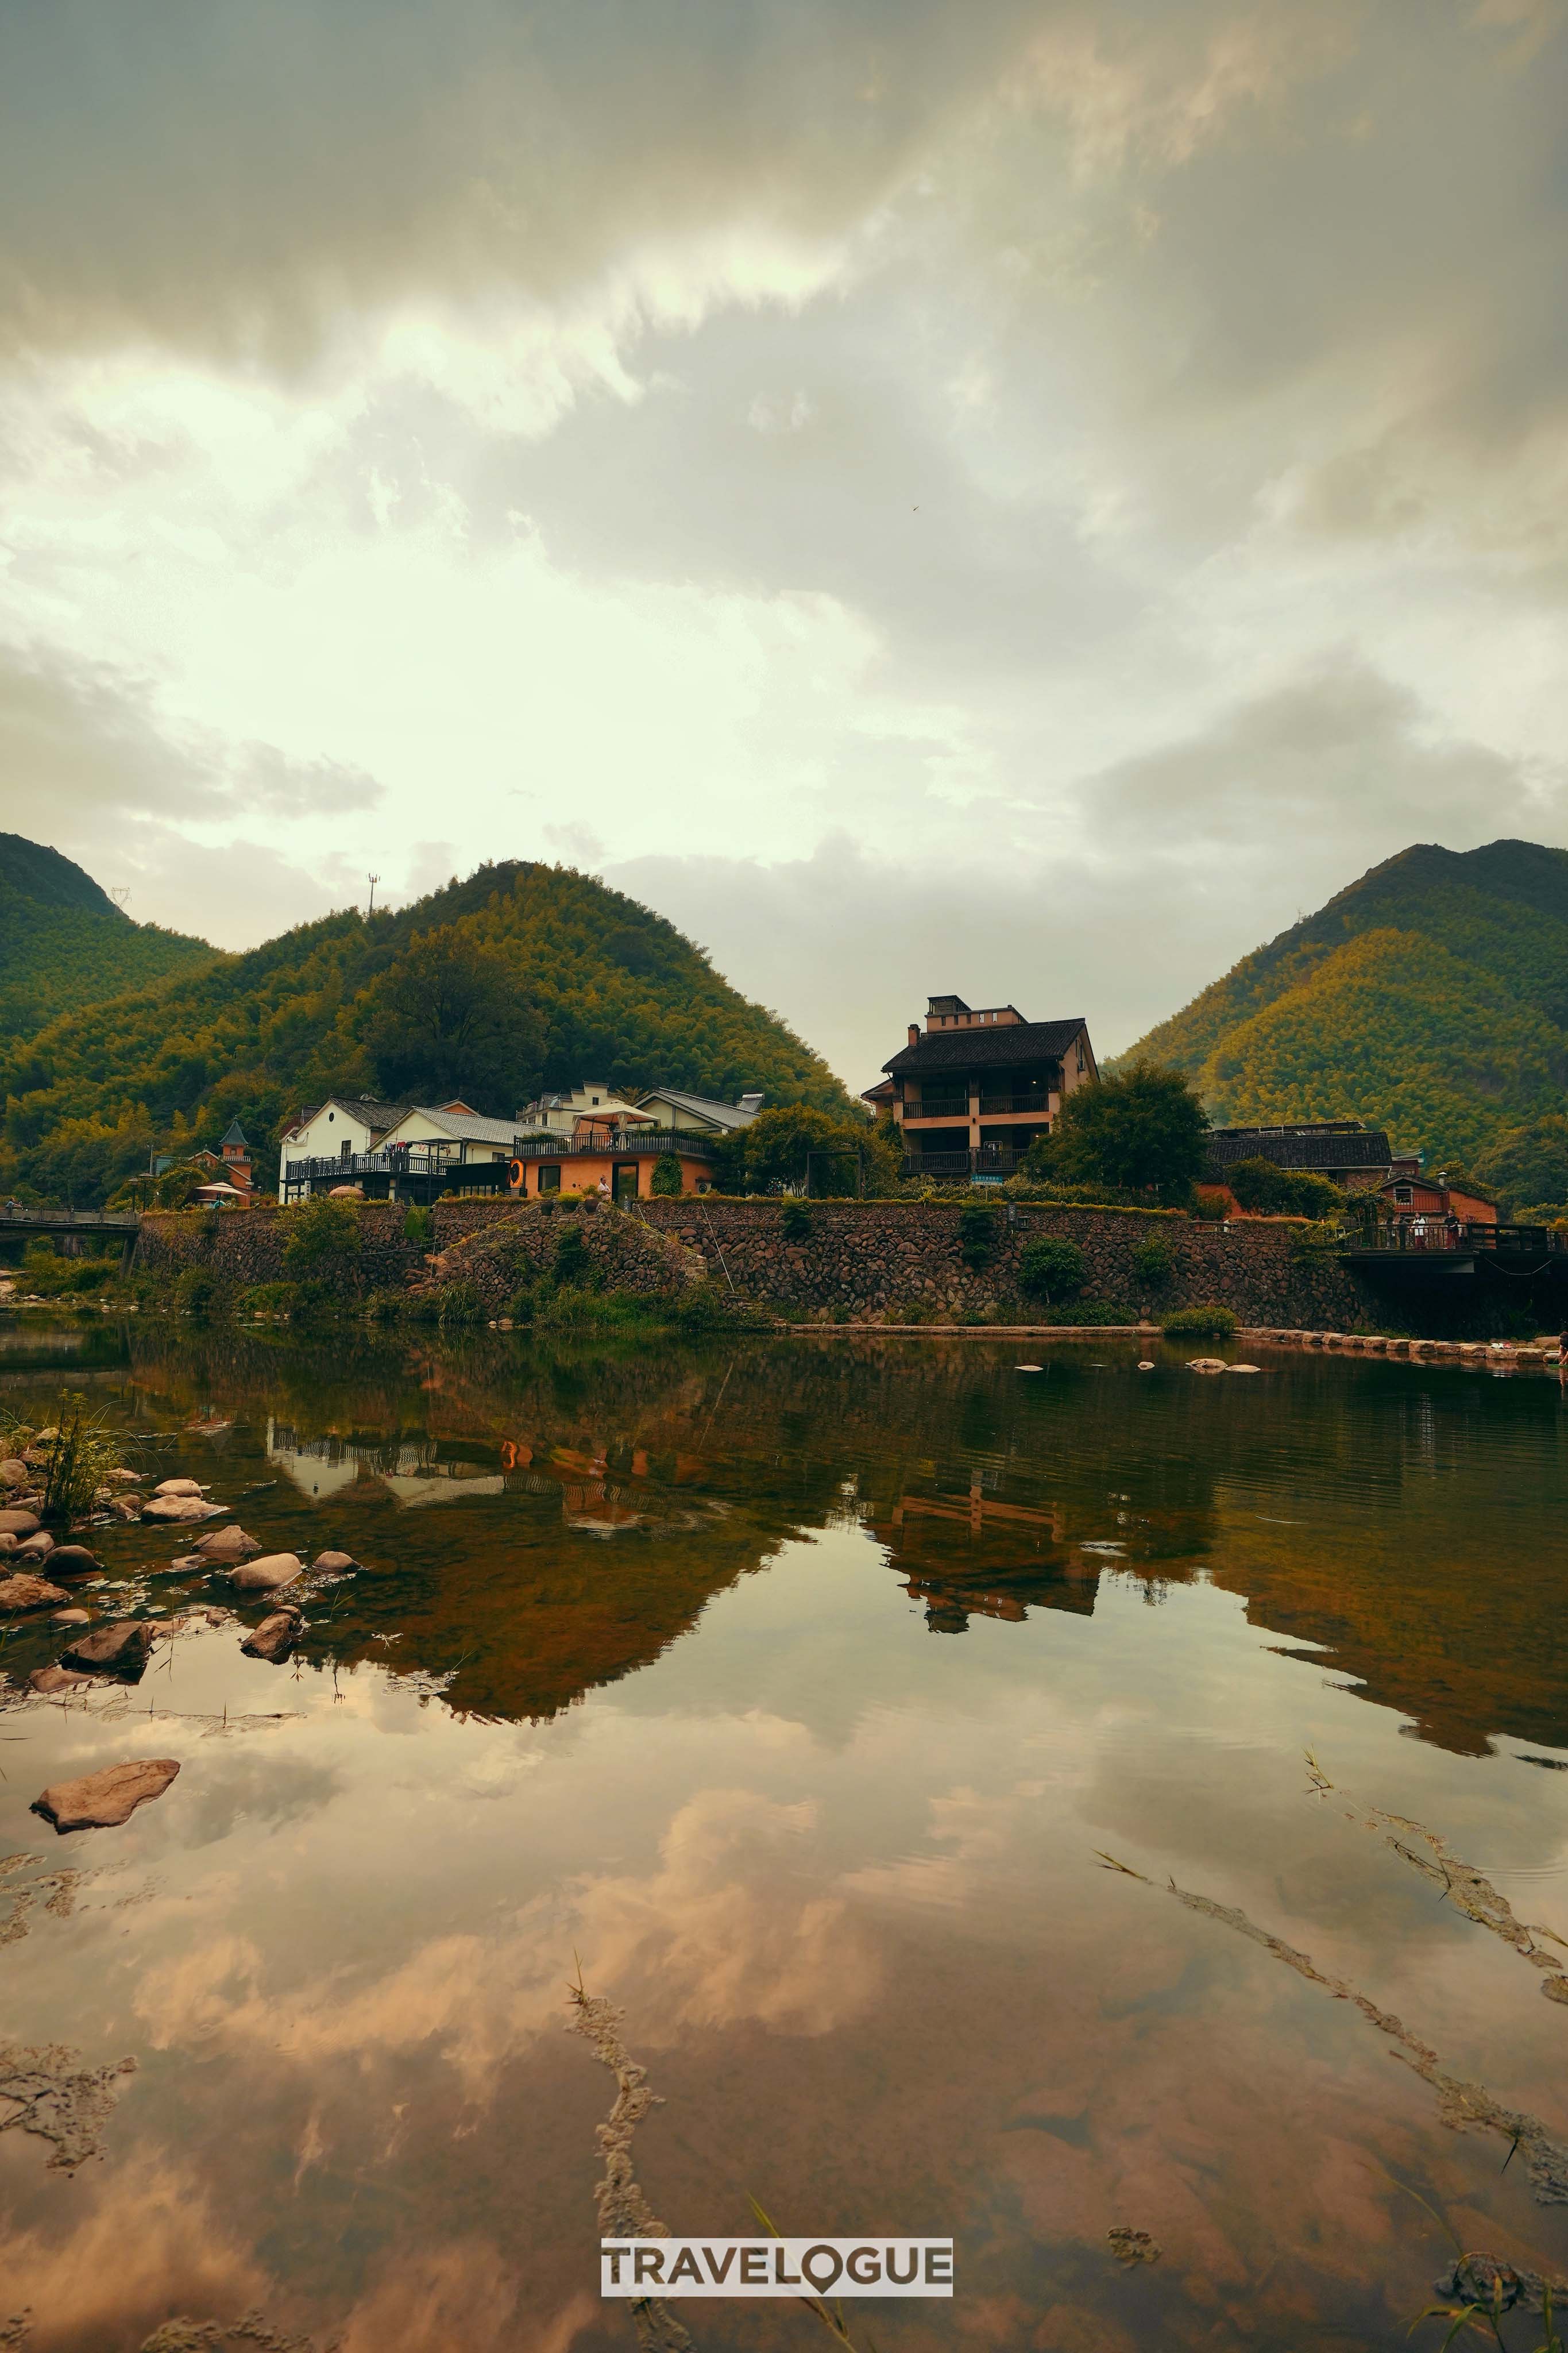 Shishe Village's rustic environment is surrounded by mountains in east China's Zhejiang Province. /CGTN